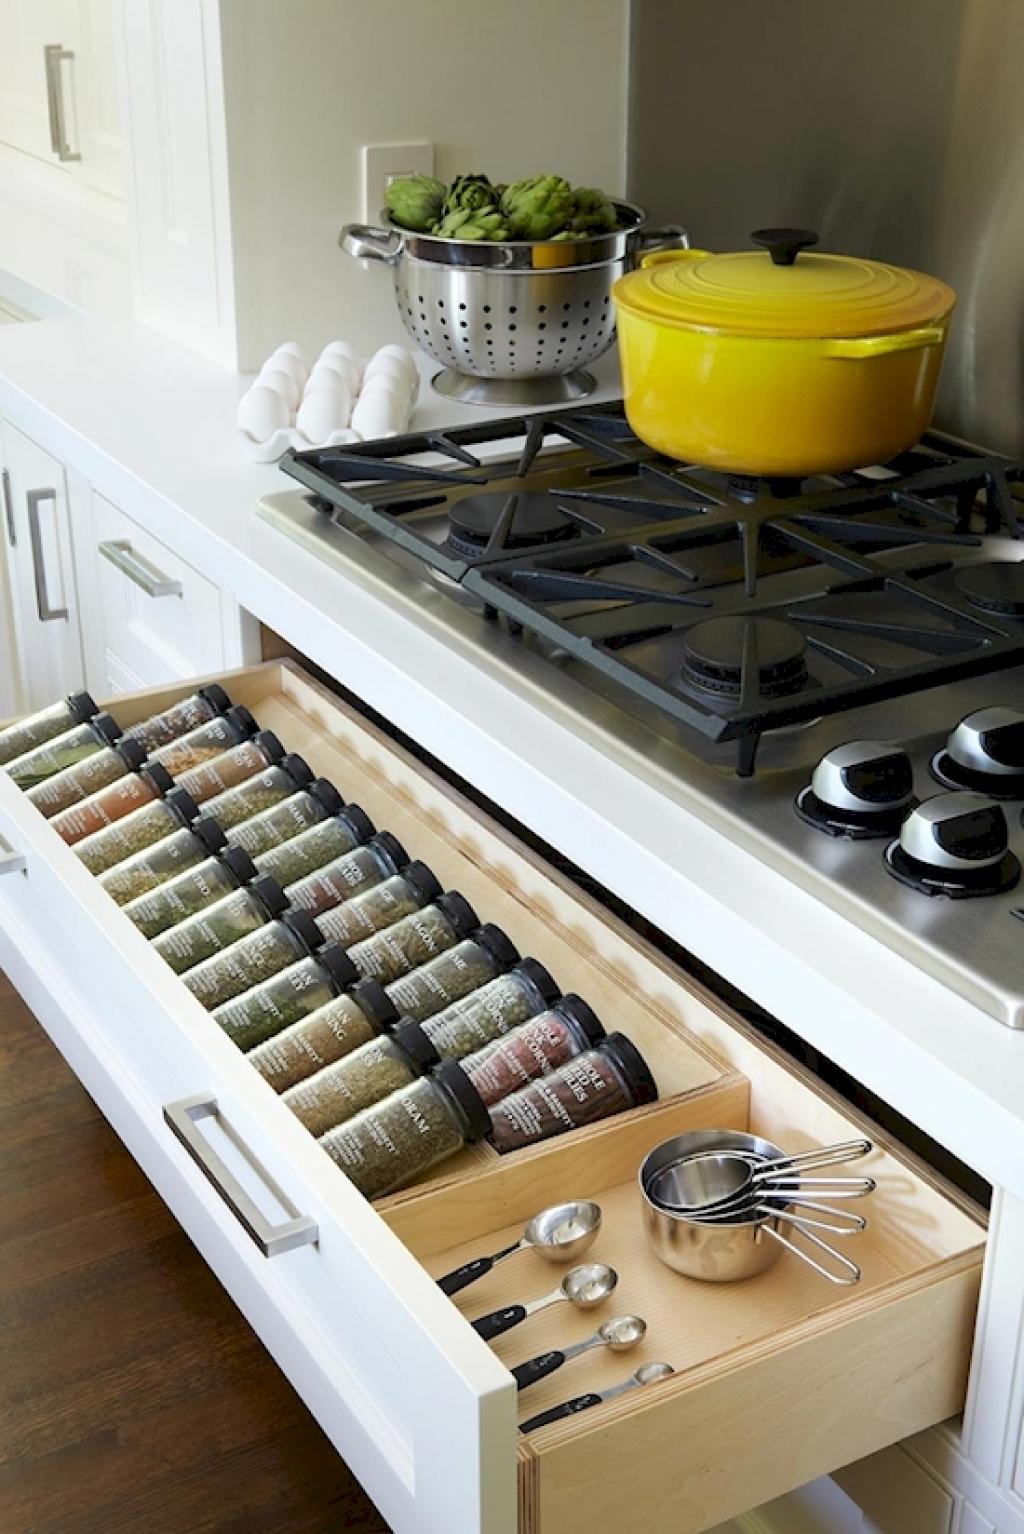 Practical and clever ideas for kitchen organization